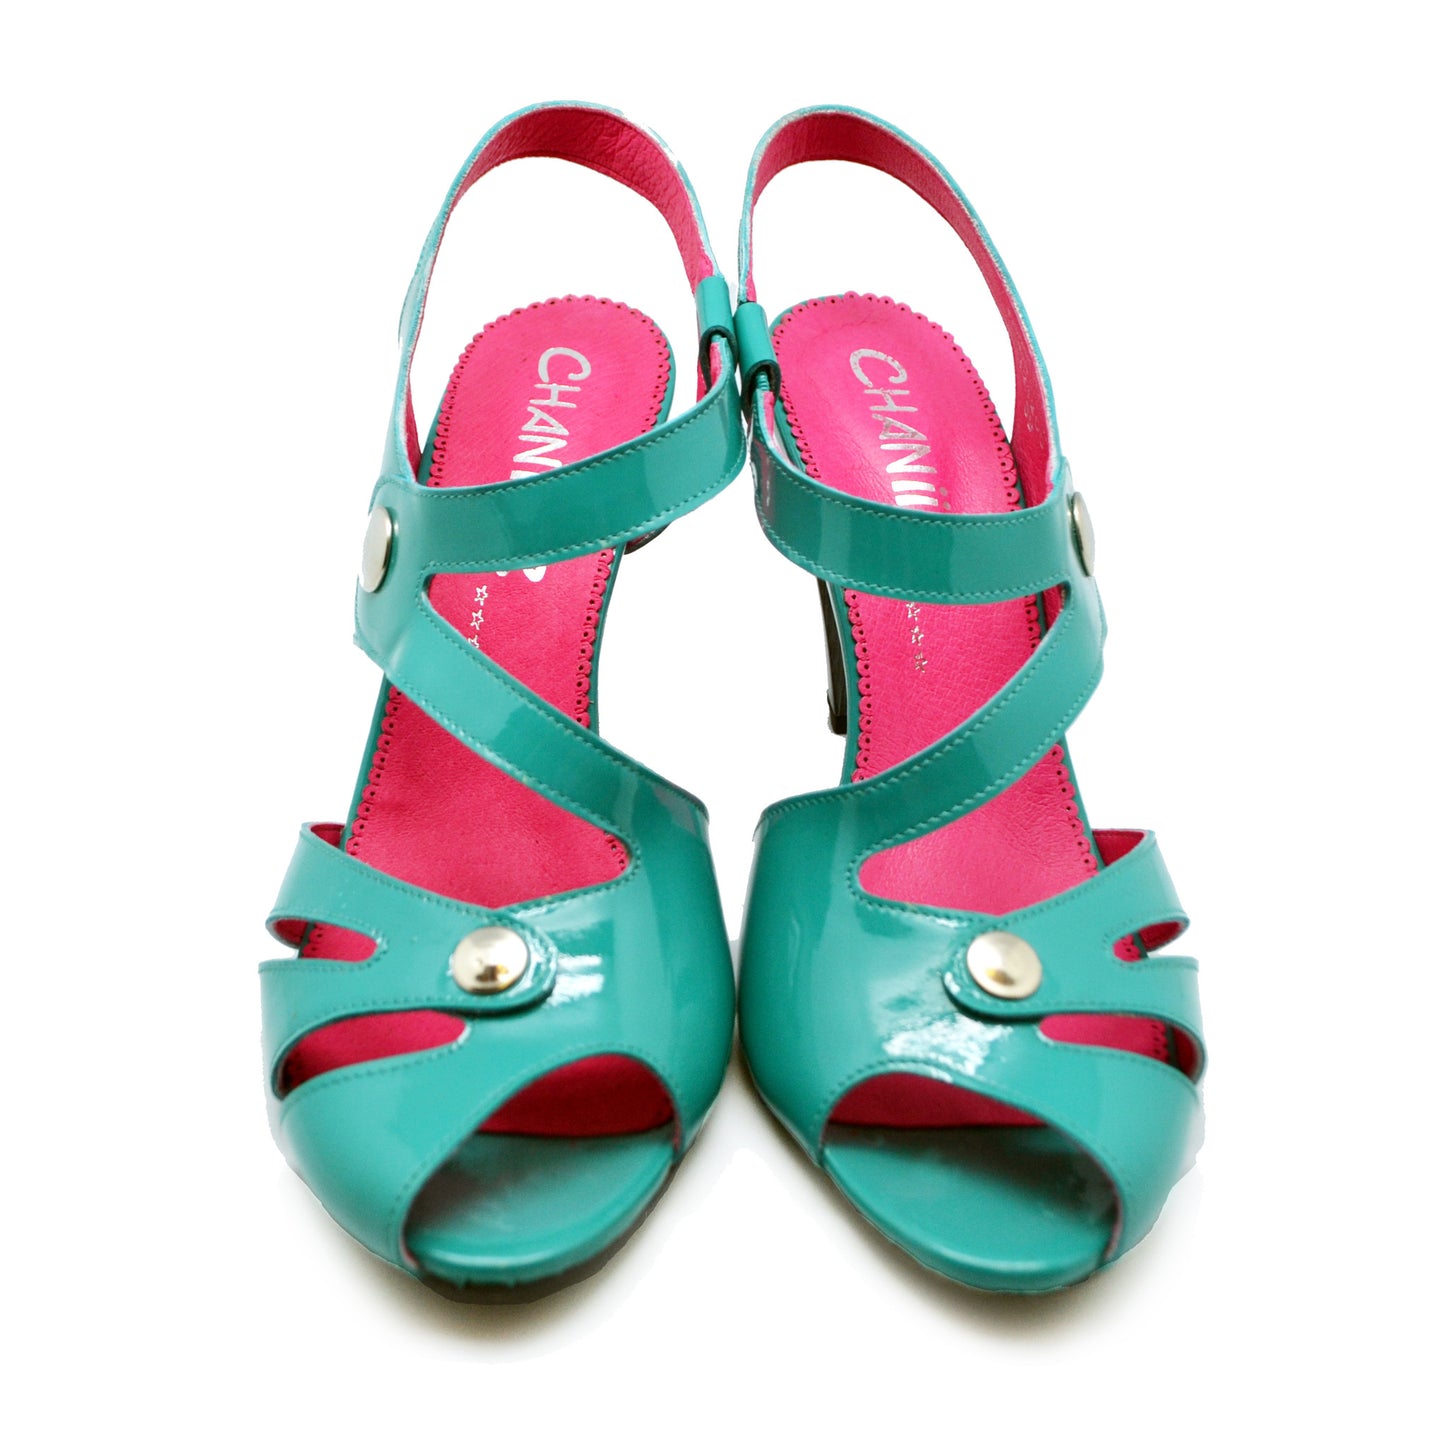 Chardonnay - Turquoise Patent open toe sandal- LAST PAIRS 38 AND 39!